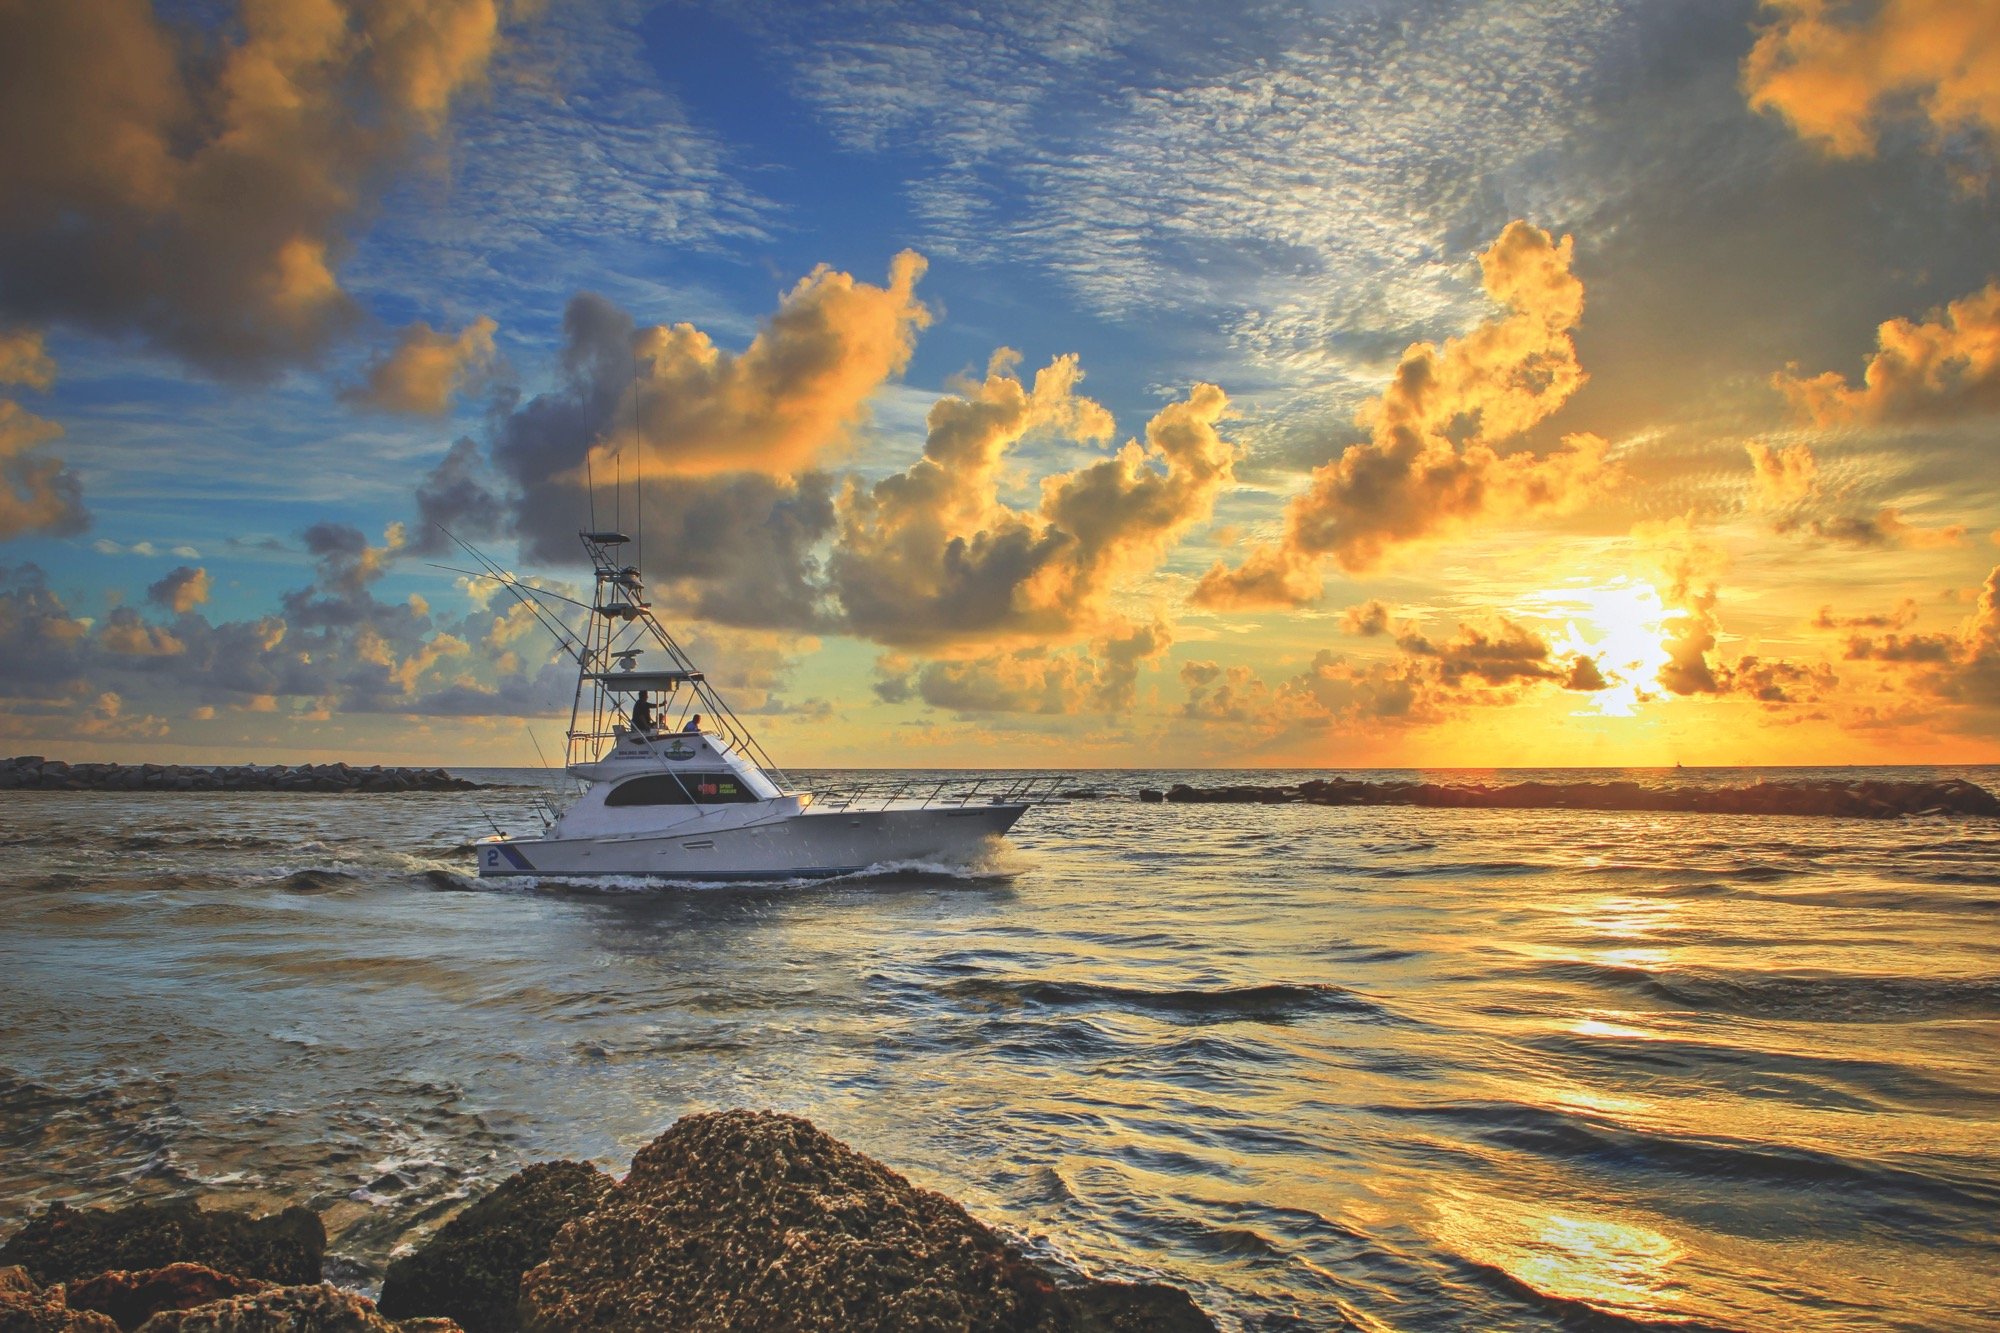 A252-Boat-Going-Fishing-During-Sunrise-at-the-Pompano-Inlet-Florida-Original.jpg